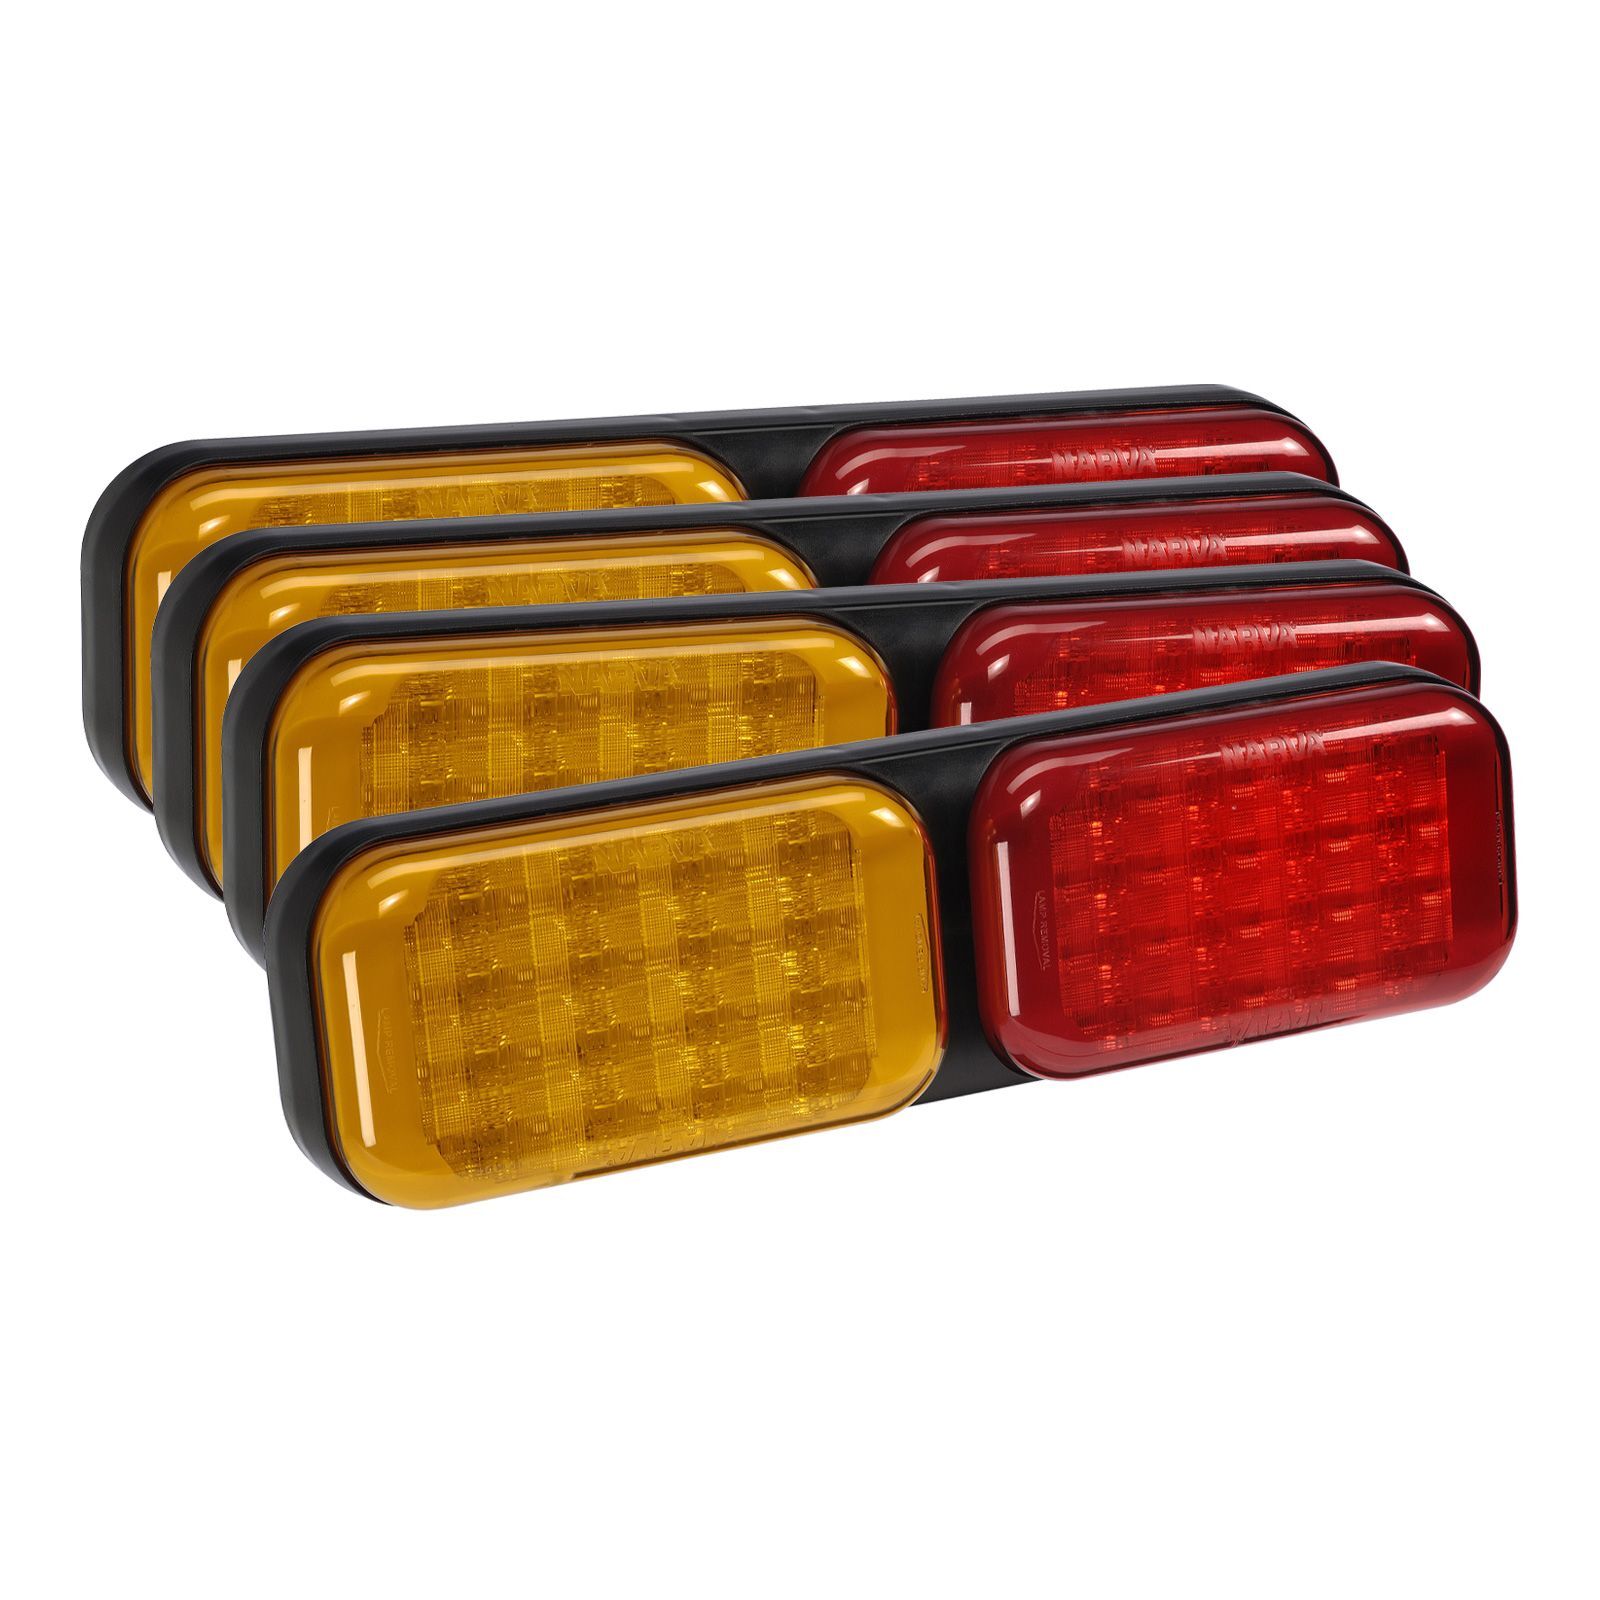 9-33 VOLT MODEL 41 LED REAR DIRECTION INDICATOR AND STOP/TAIL LAMP